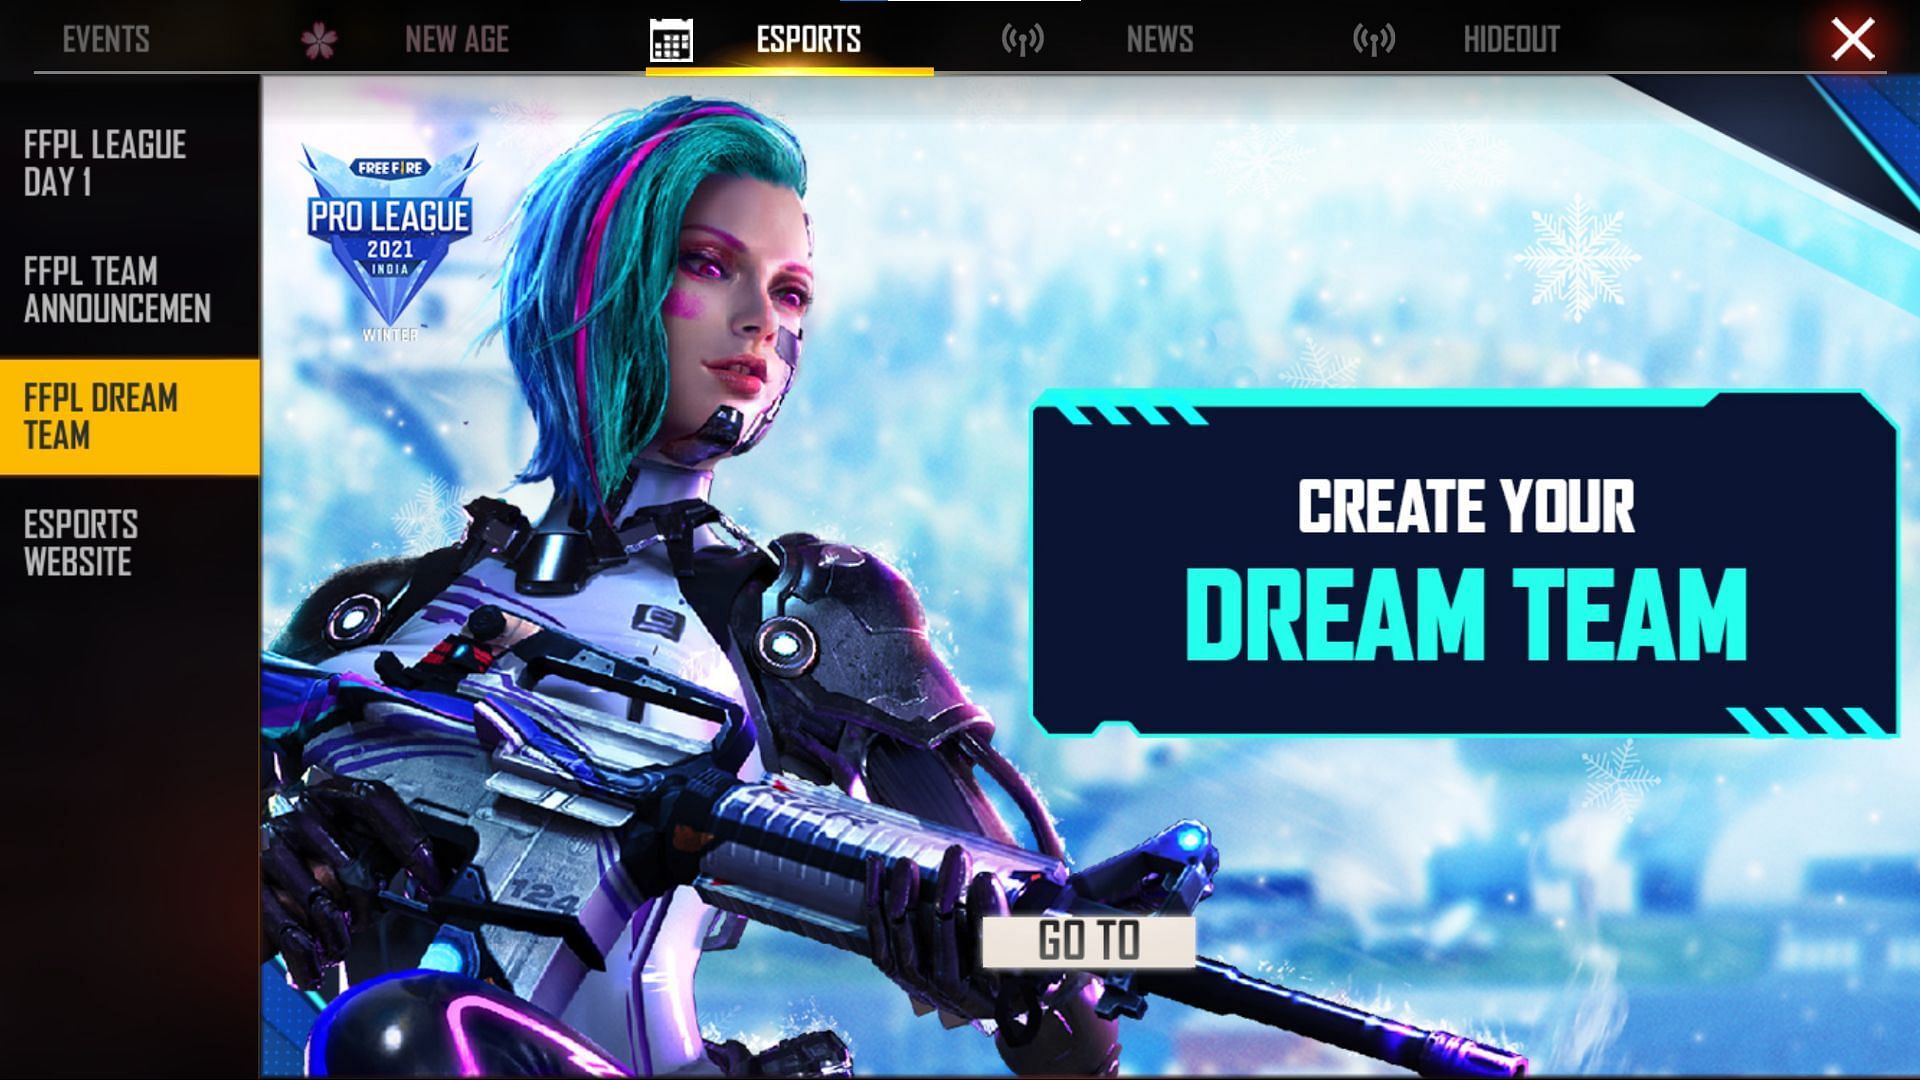 Click Go To button to open the event interface in Free Fire (Image via Garena)